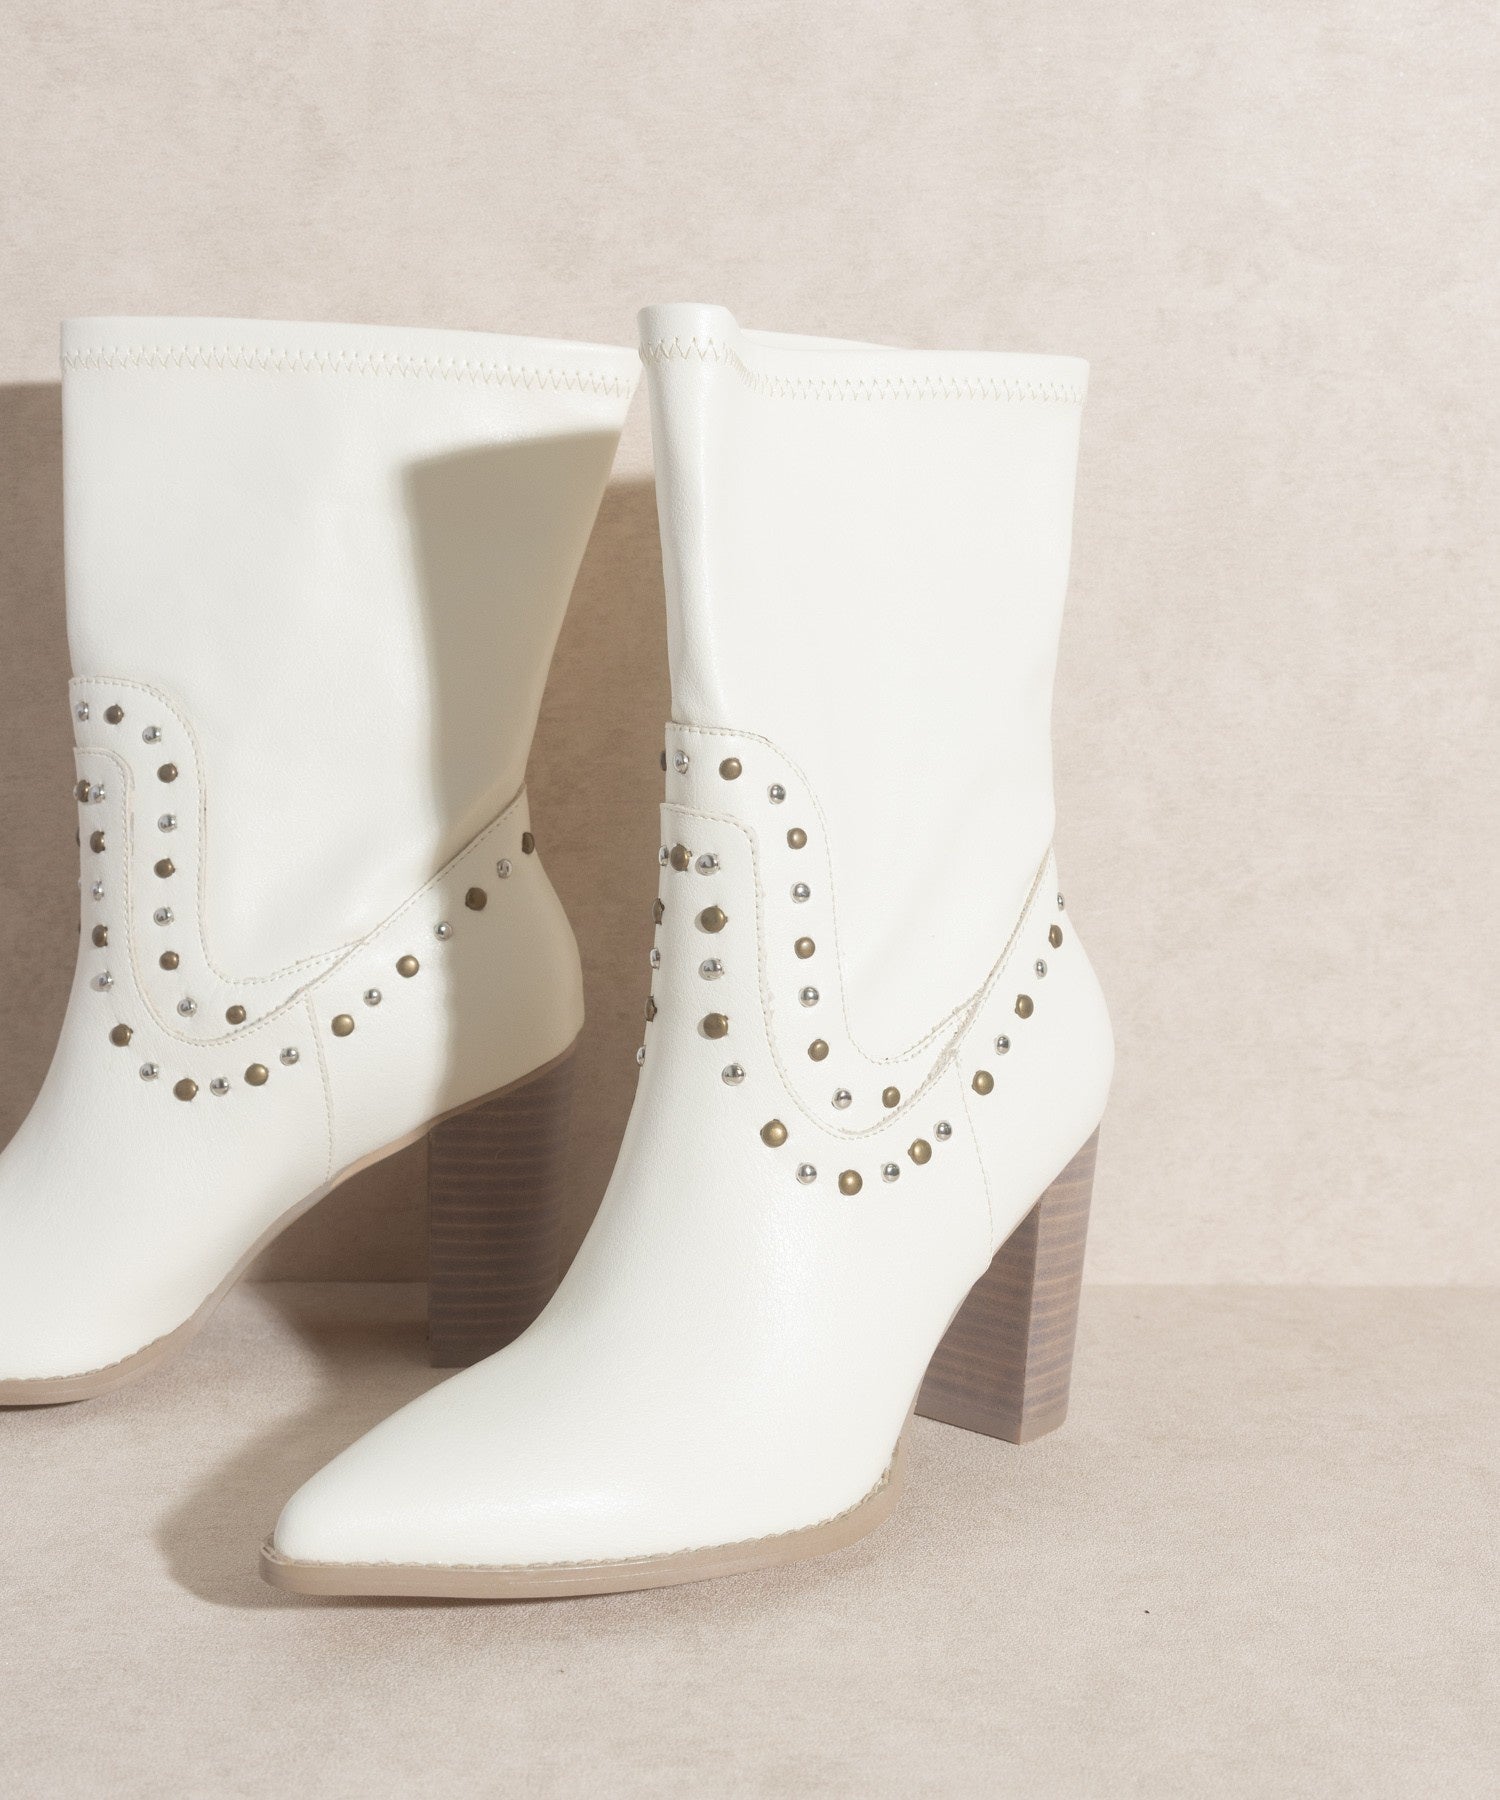 The Wilde Studded Boots *Runway Exclusive*